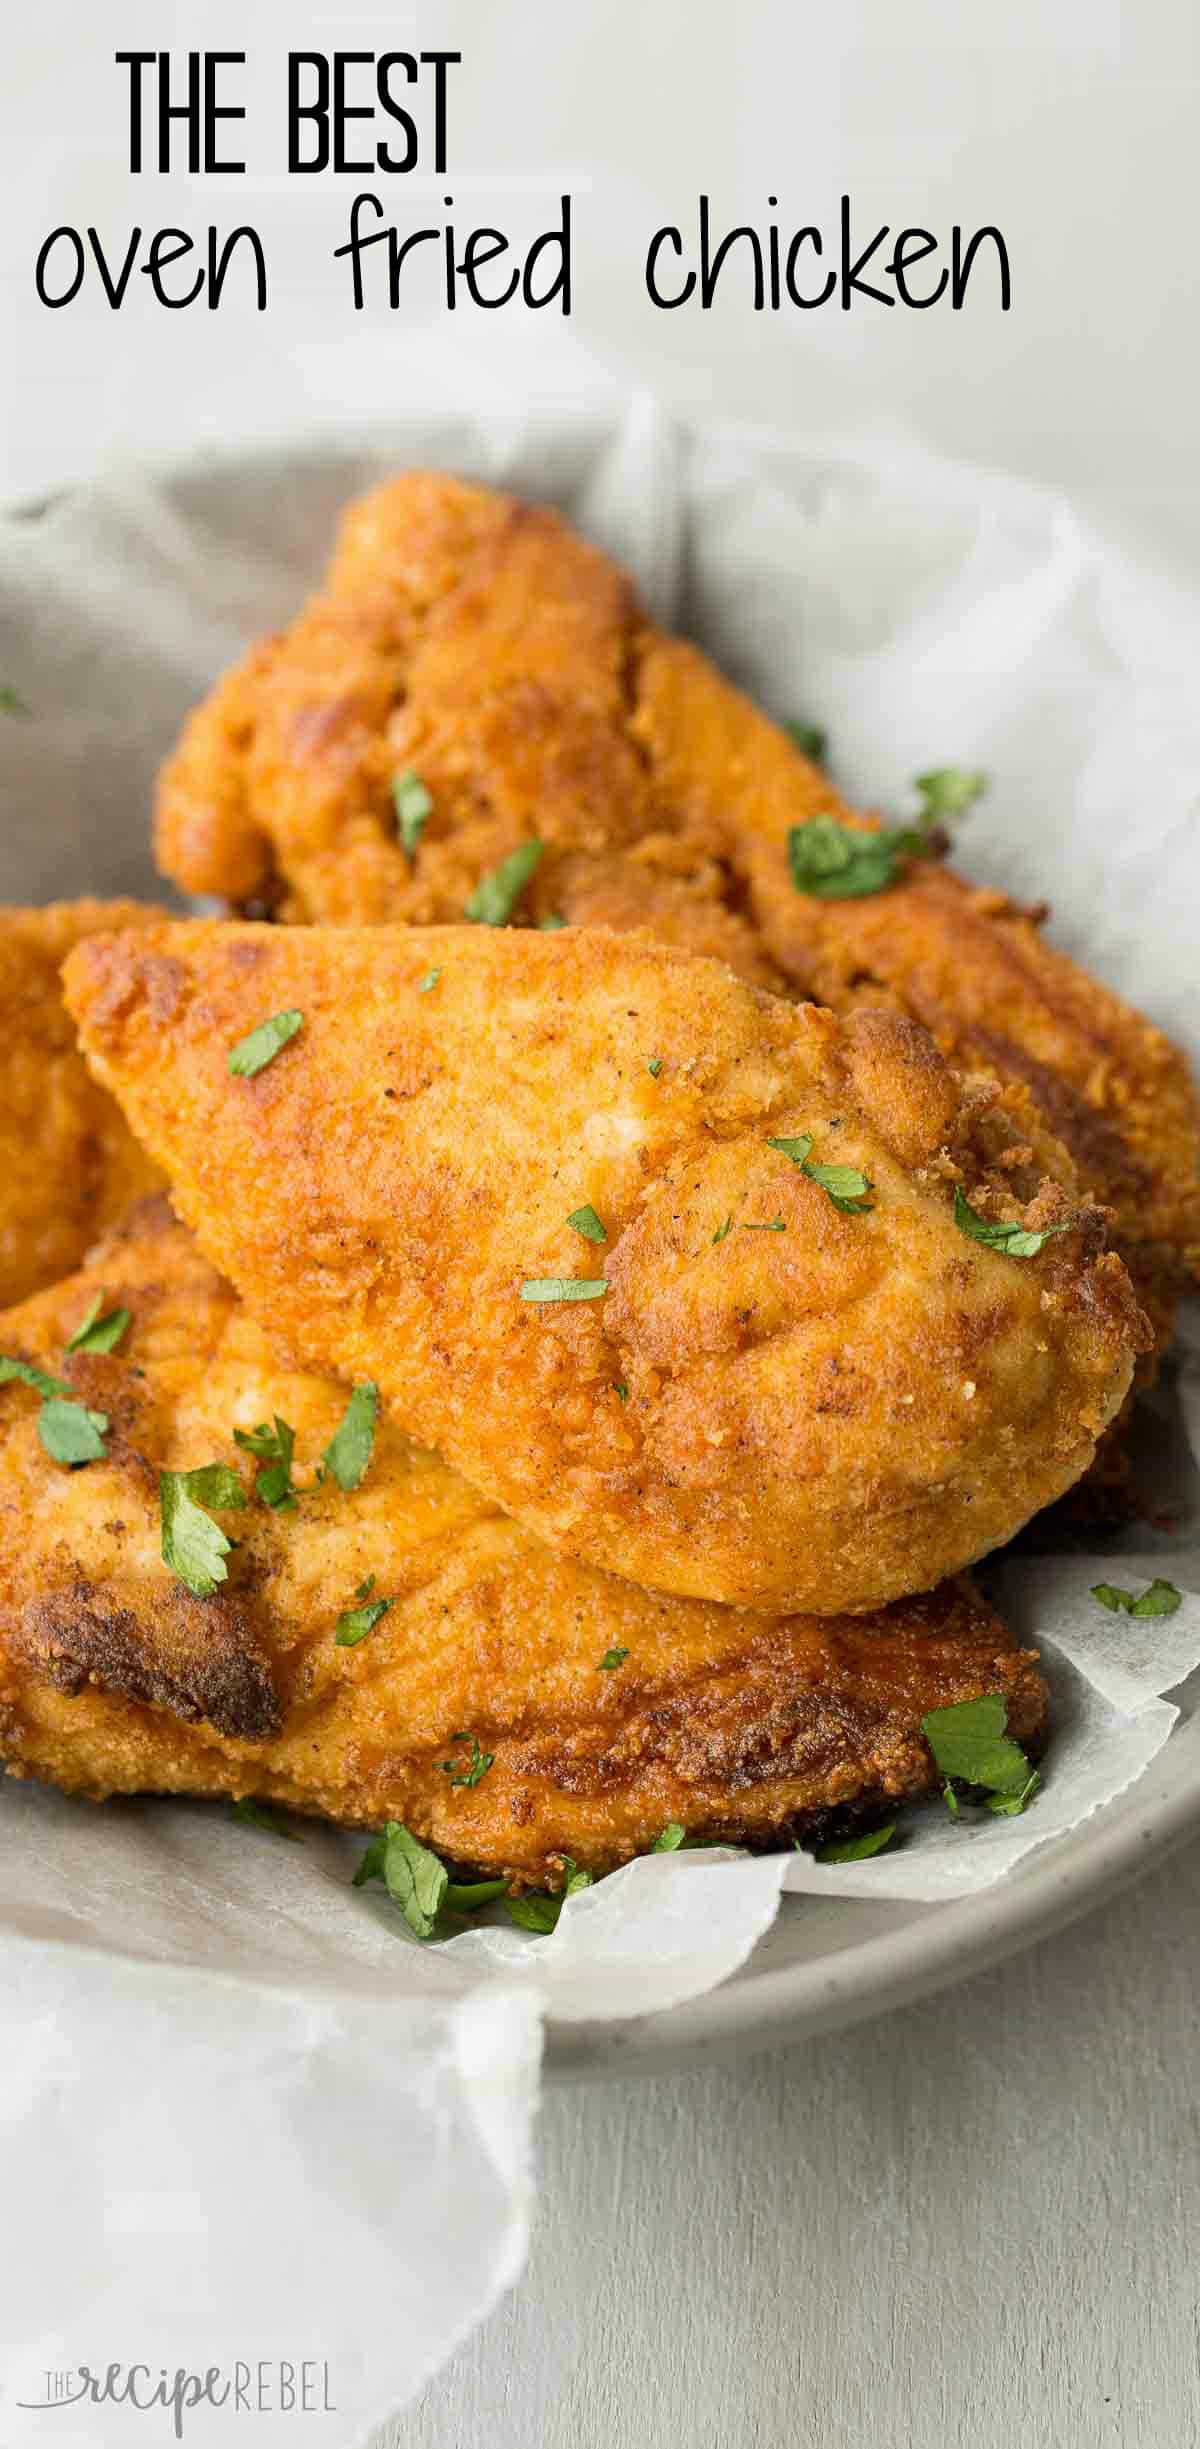 Oven Fried Chicken Recipes
 The BEST Oven Fried Chicken Recipe Baked Fried Chicken